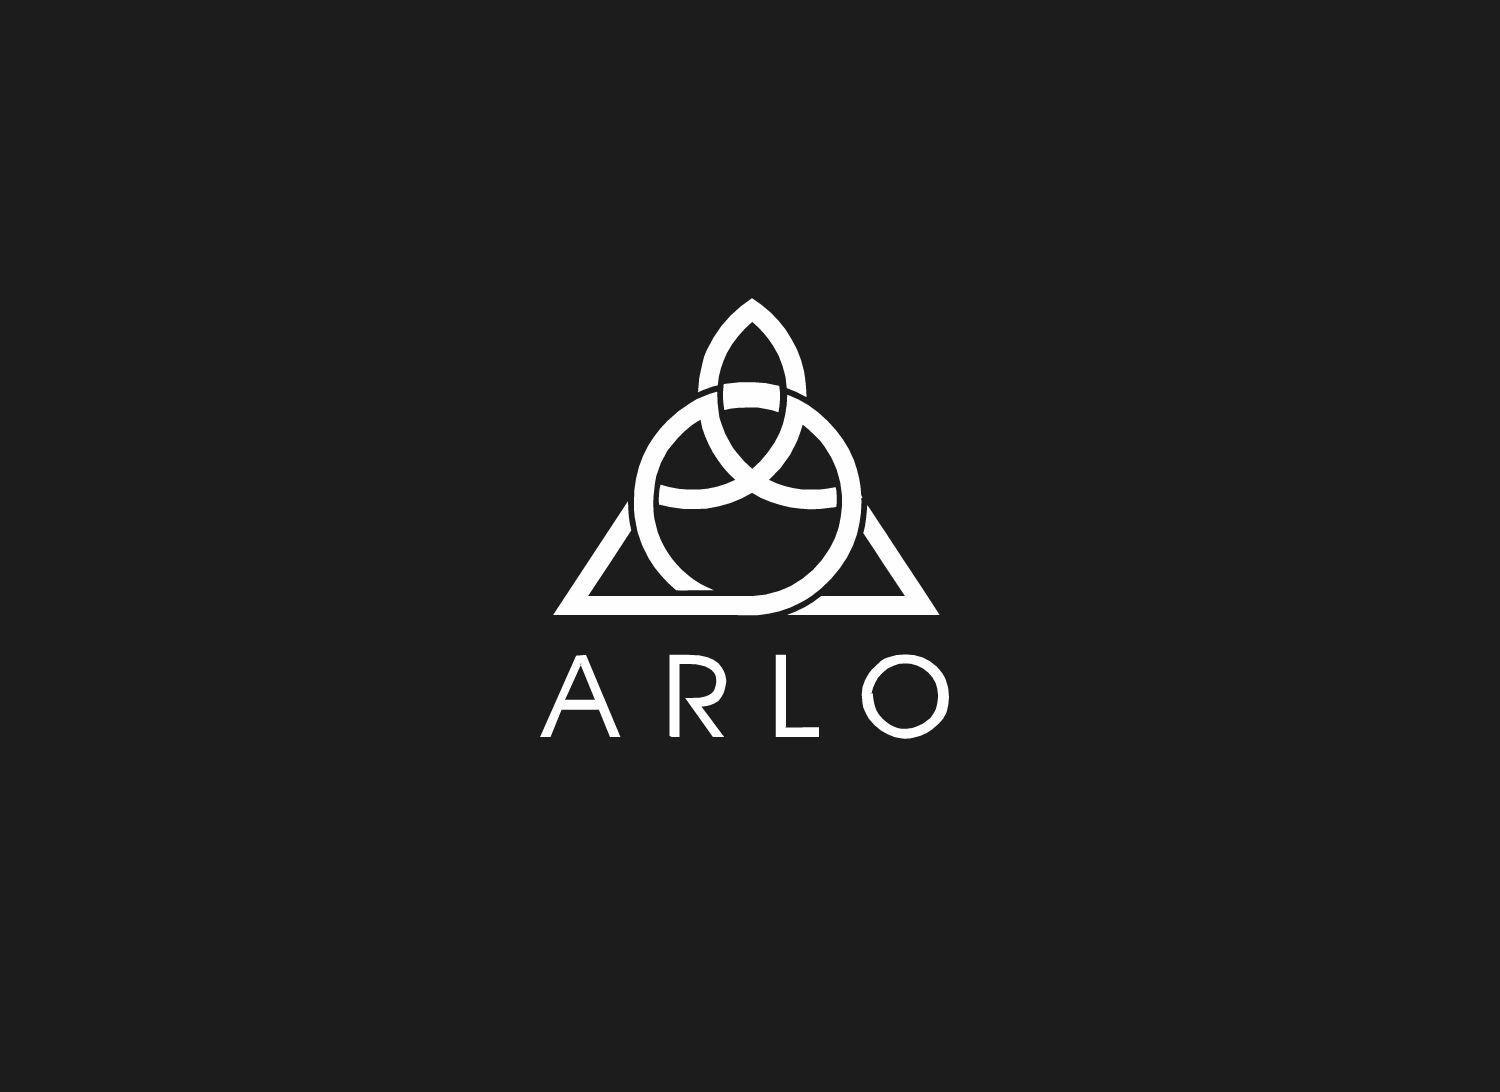 Arlo Logo - Serious, Masculine, Fitness Logo Design for ARLO by CreativeBest ...